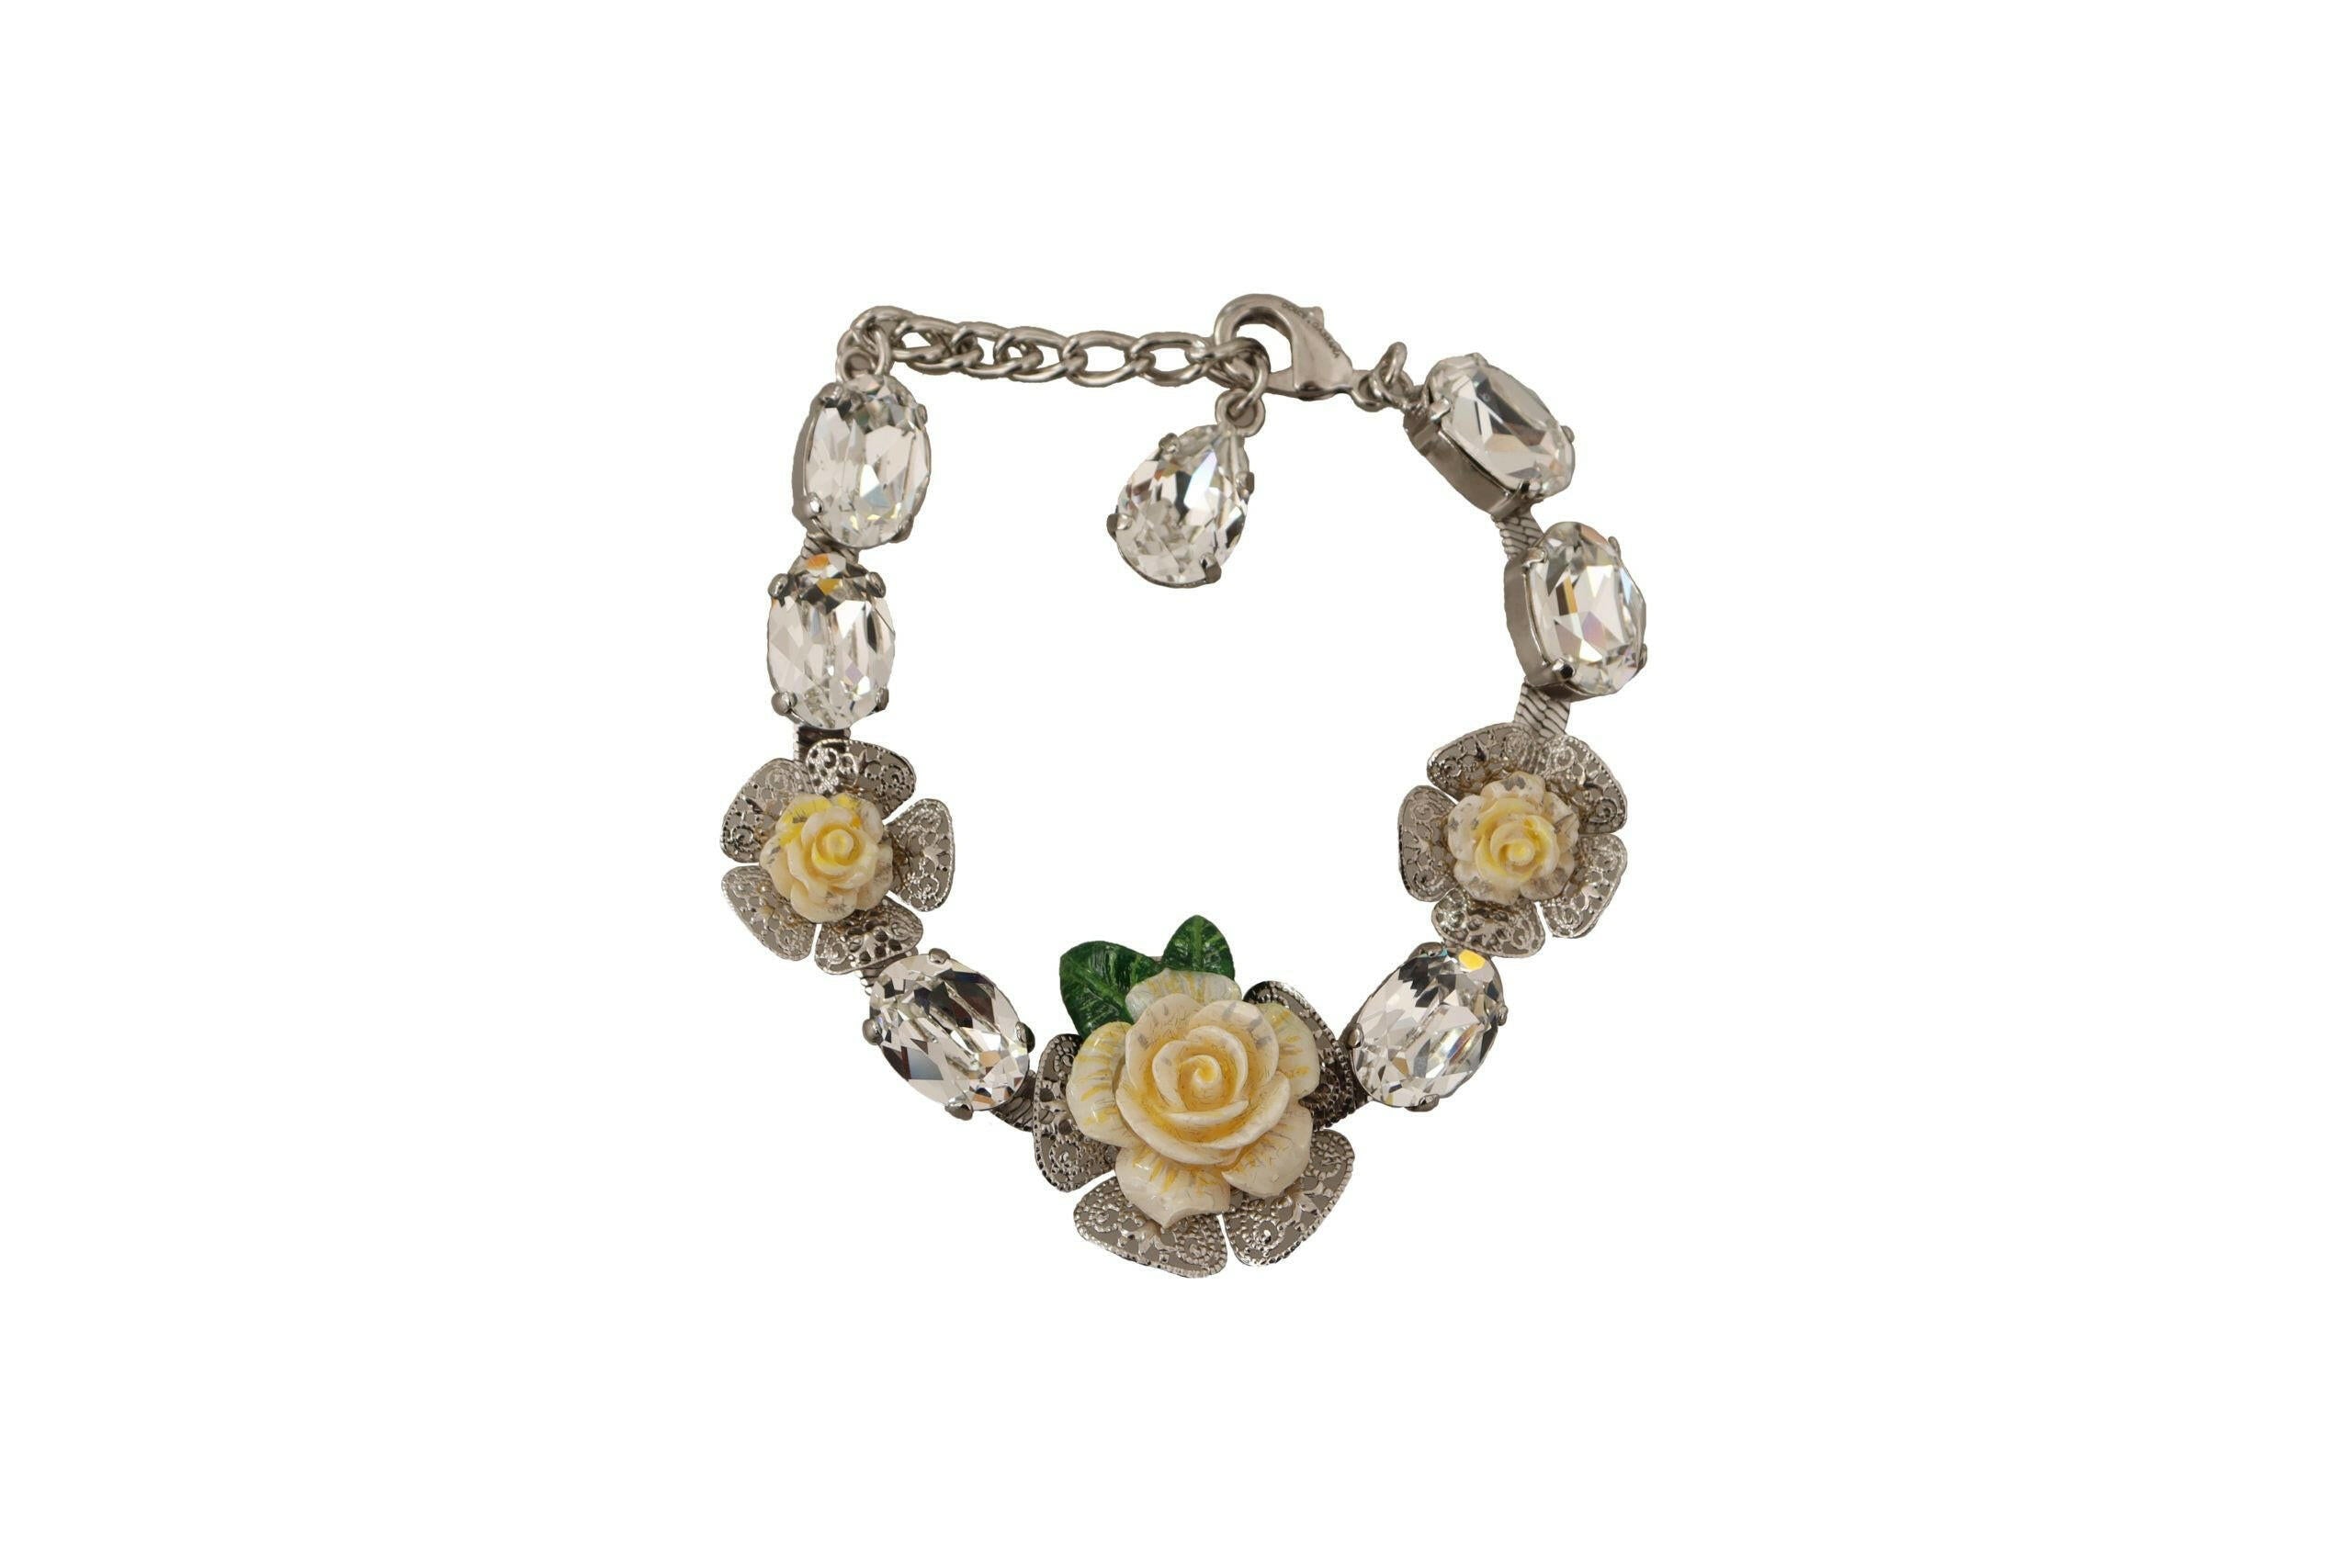 Dolce & Gabbana Silver Brass Chain Clear Crystal Floral Bracelet - GENUINE AUTHENTIC BRAND LLC  